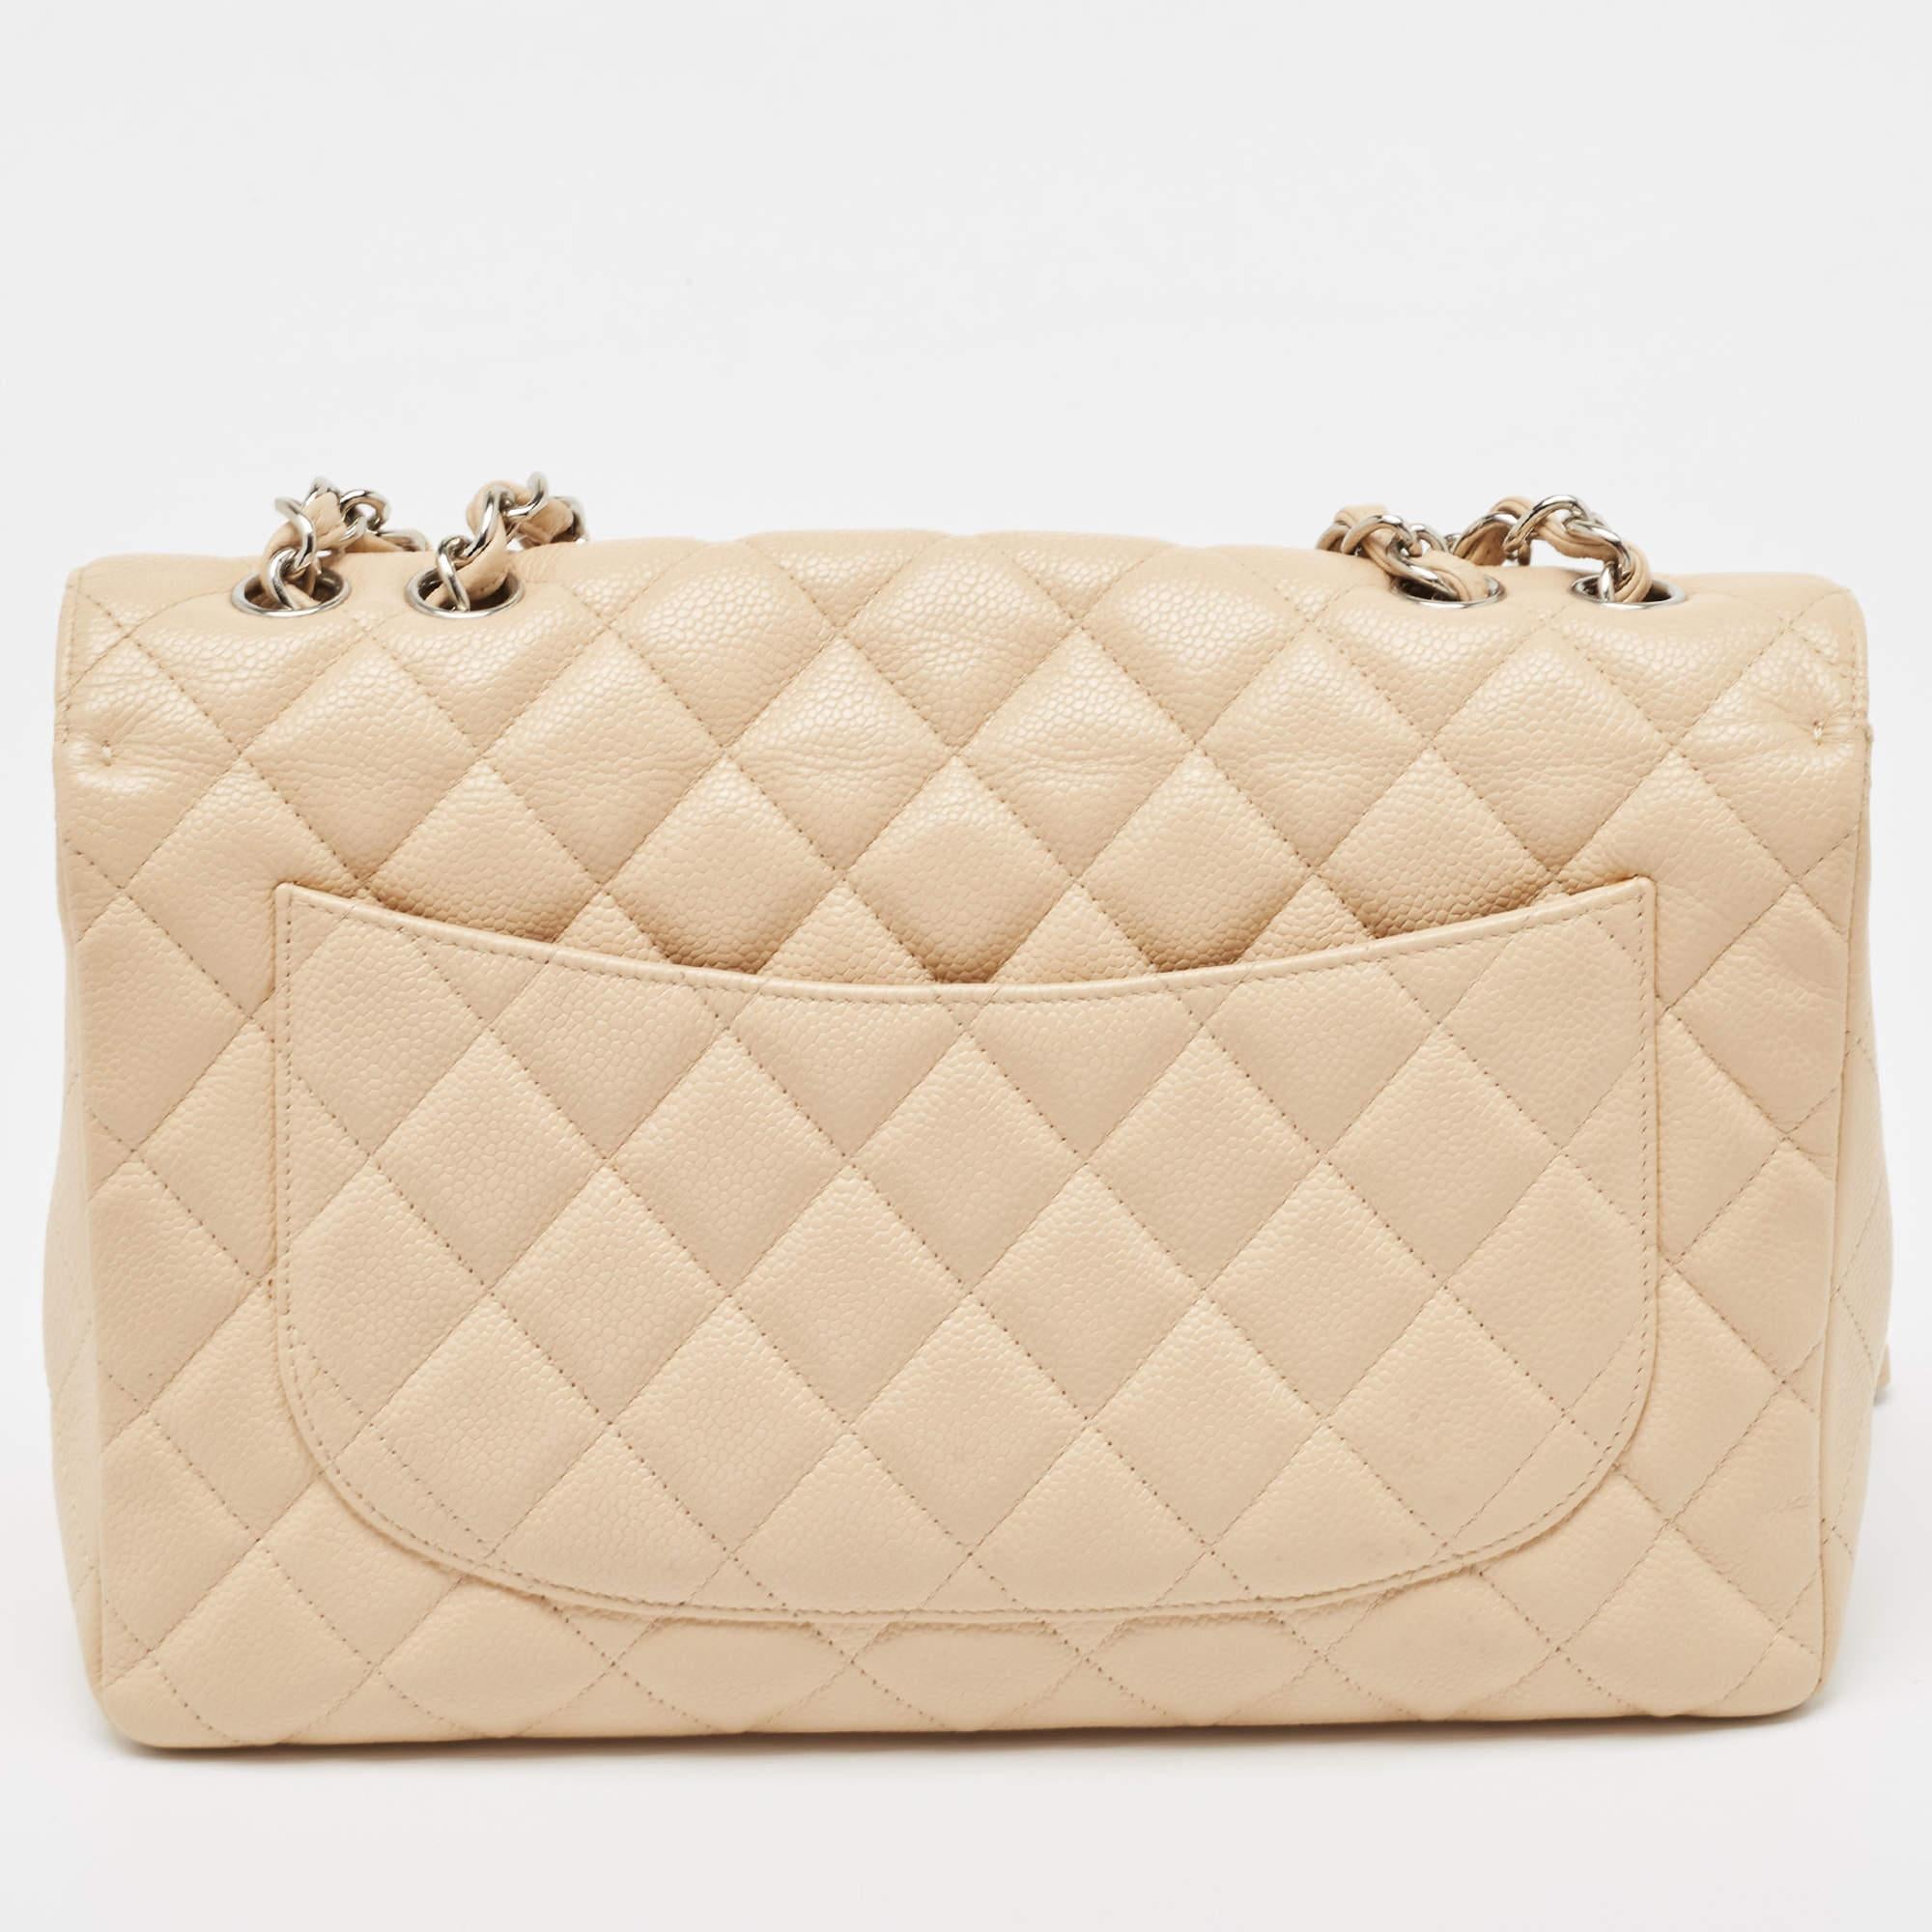 Chanel Beige Quilted Caviar Leather Jumbo Classic Single Flap Bag 8